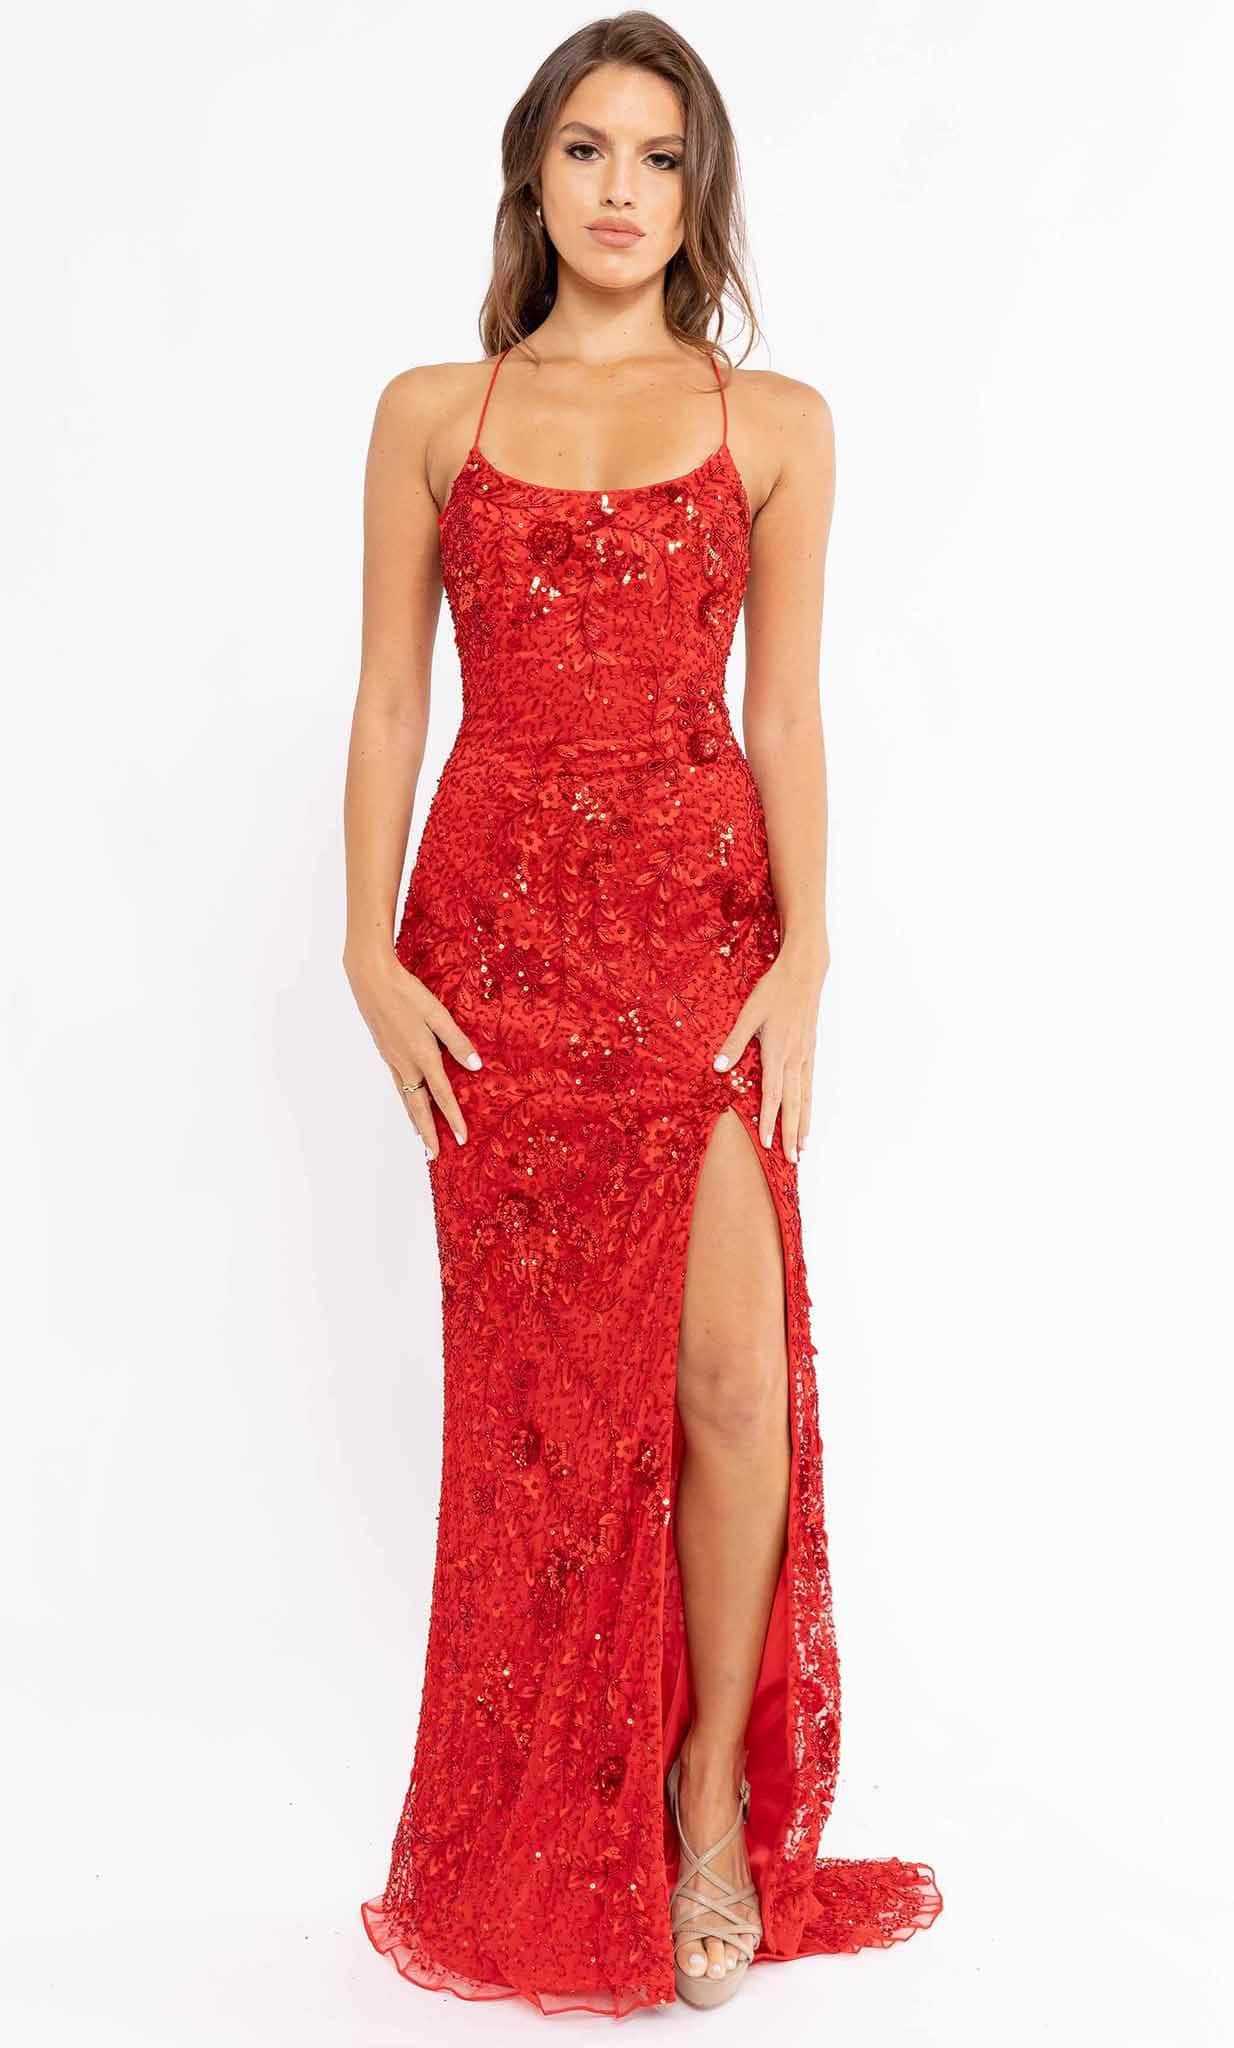 Primavera Couture 3931 - Embellished Scoop Neck Prom Gown Special Occasion Dress 000 / Red